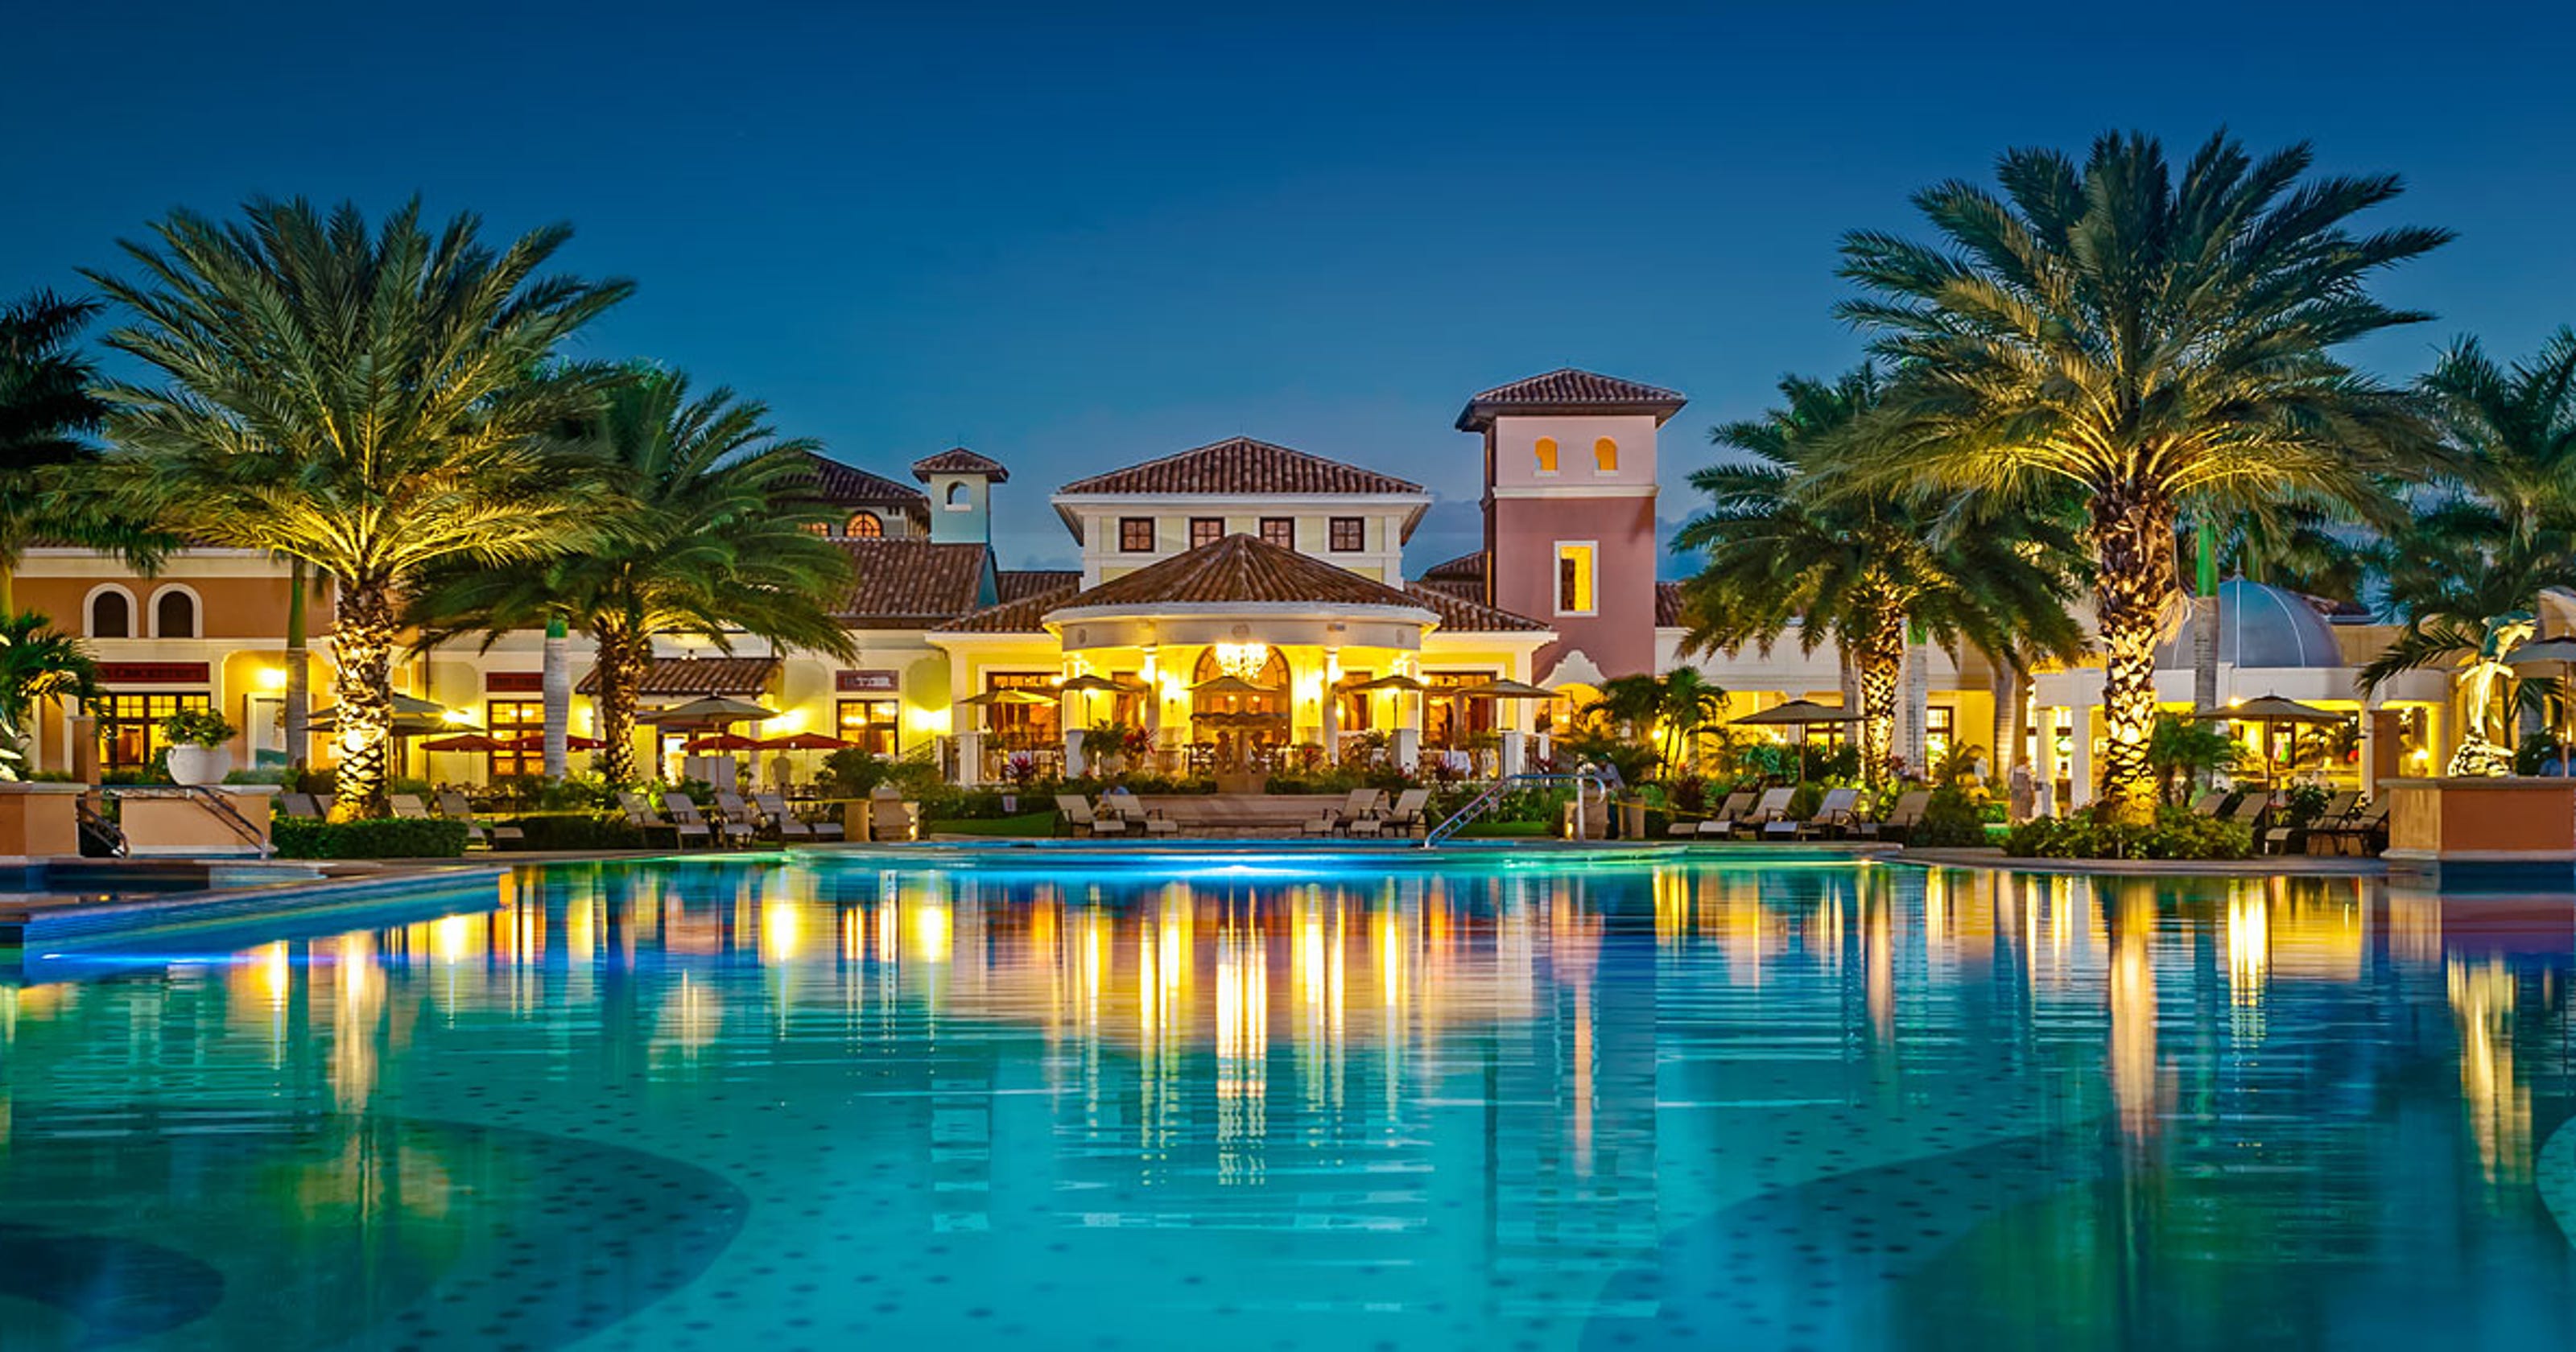 636685025095531195 In Turks Caicos Islands Beaches Is Enormous With 758 Rooms And Suites Spread Out Over 75 Acres Credit Beaches Resorts ?width=3200&height=1680&fit=crop